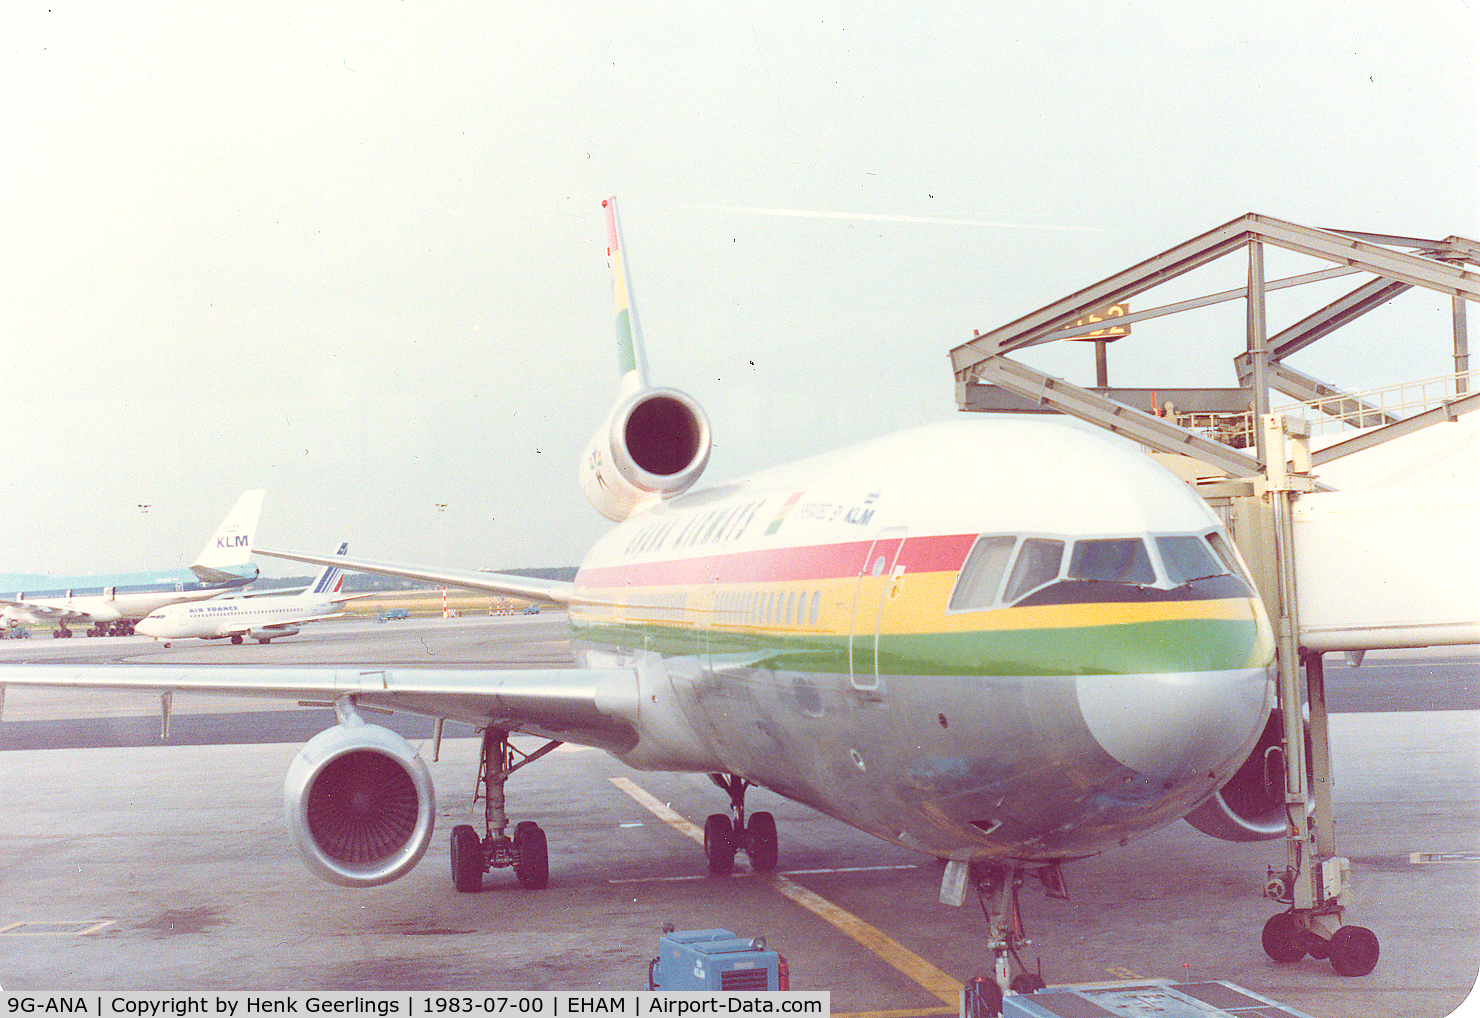 9G-ANA, 1983 McDonnell Douglas DC-10-30 C/N 48286, Ghana Airways. Lsd from KLM and operated by KLM